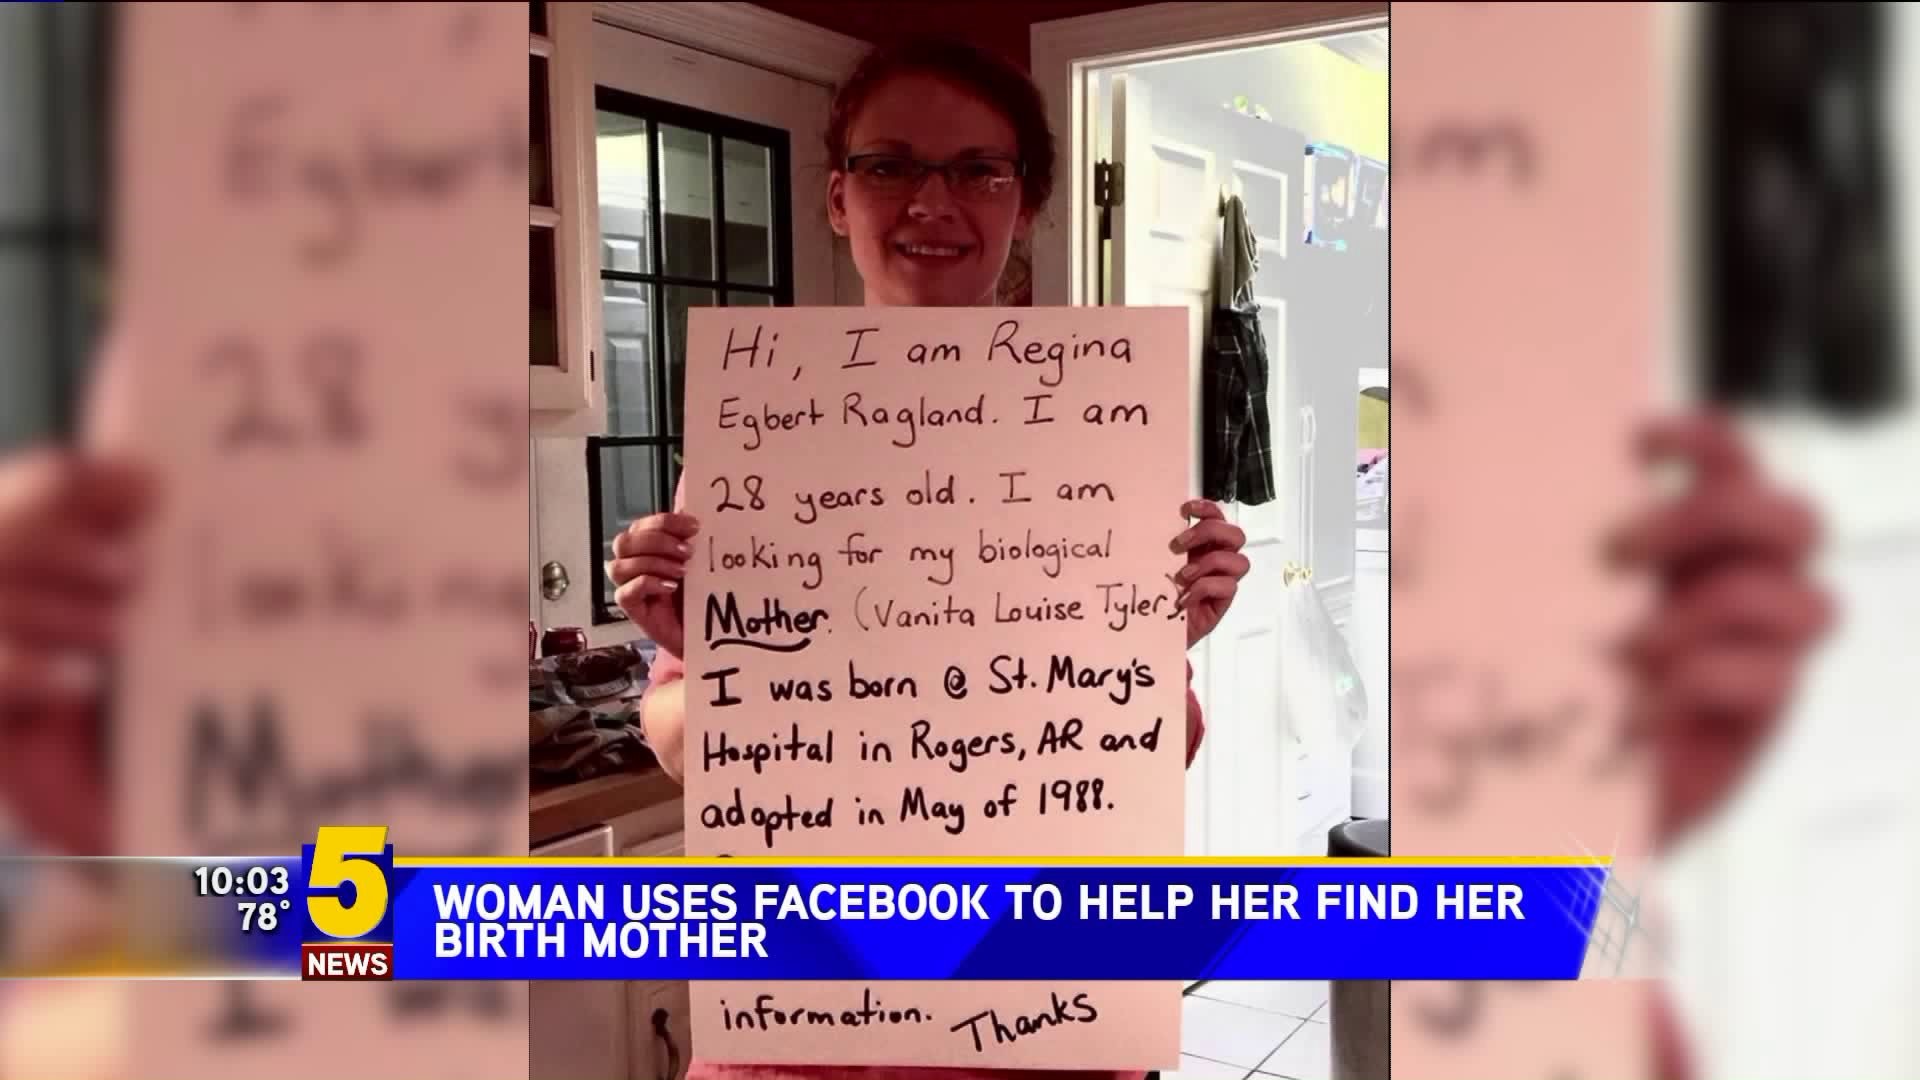 Woman Using Facebook To Help Find Her Birth Mother